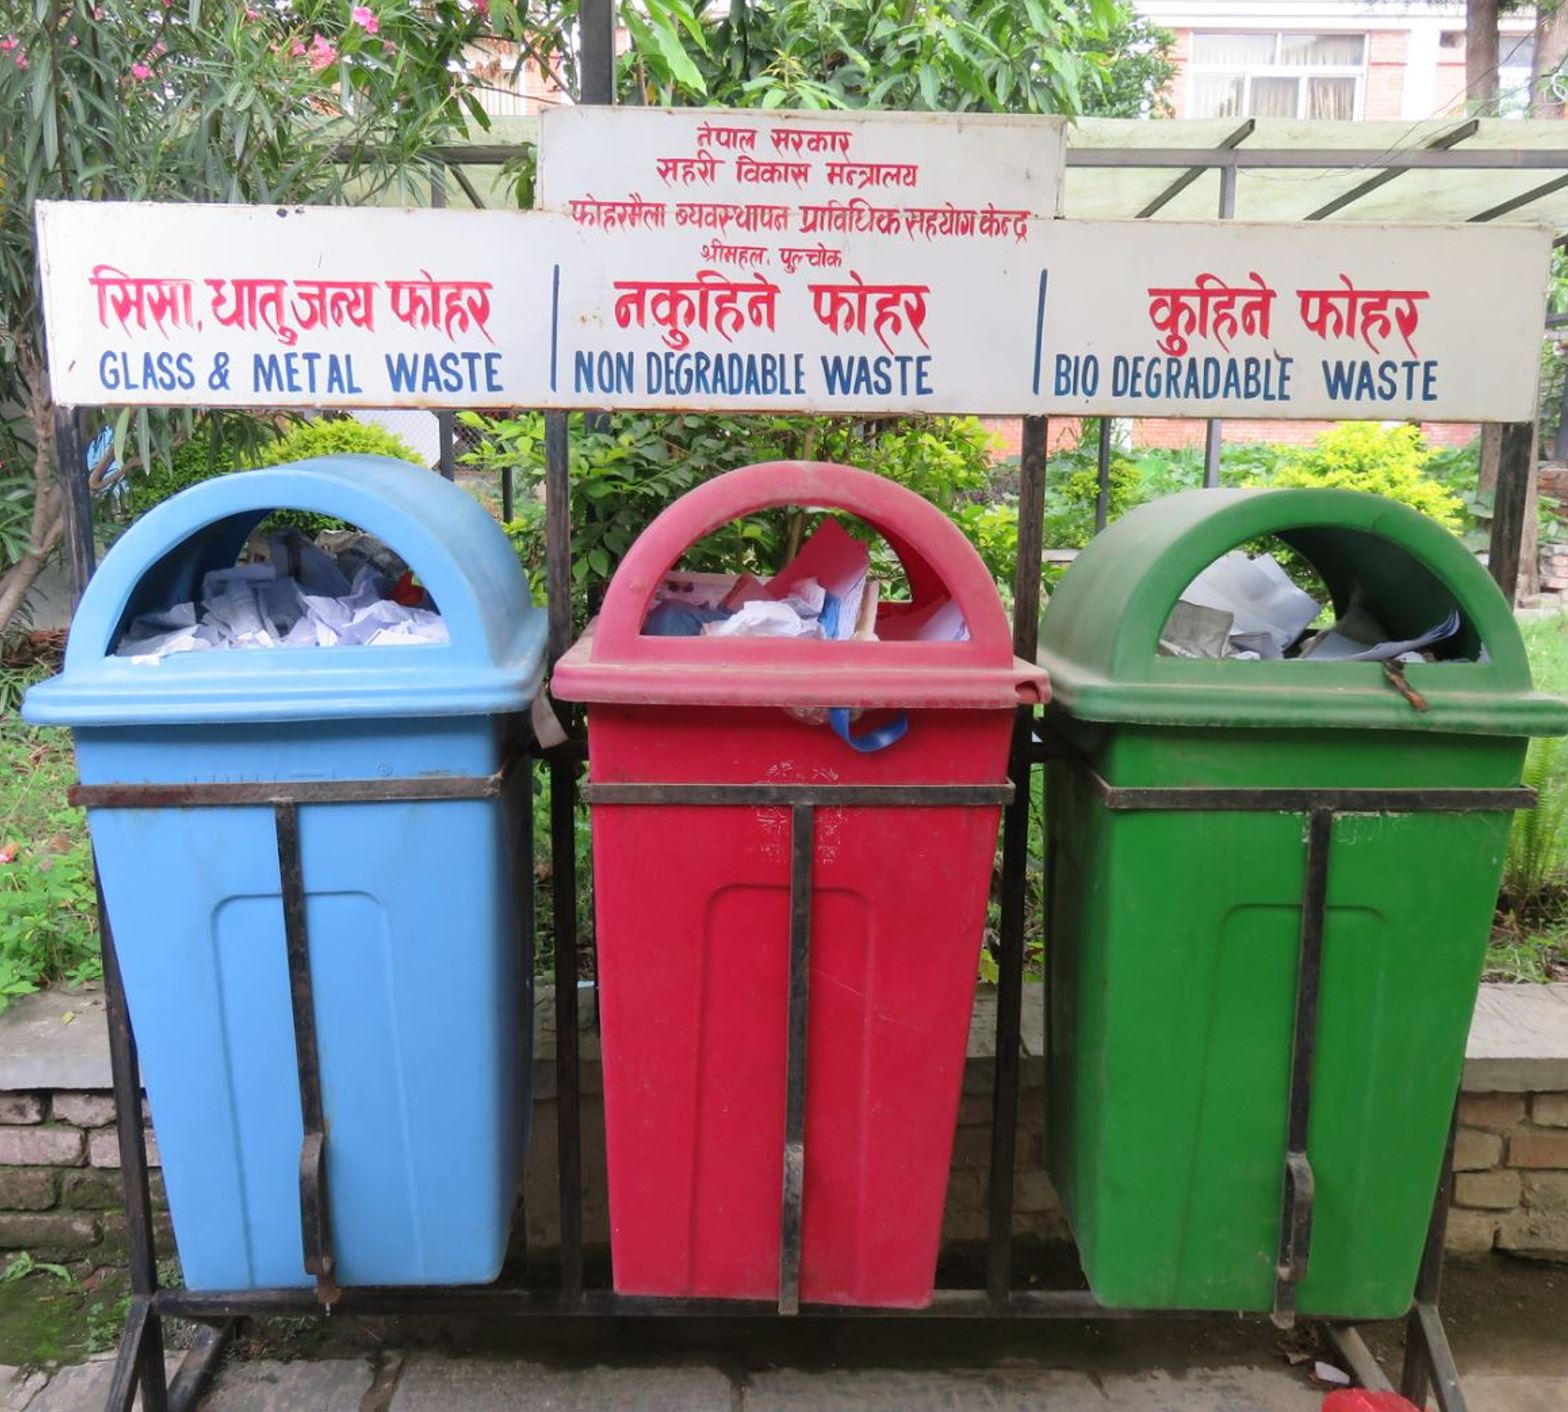 Global Peace Foundation | GPF Nepal Supports Forums on Solid Waste Management, Covid Prevention